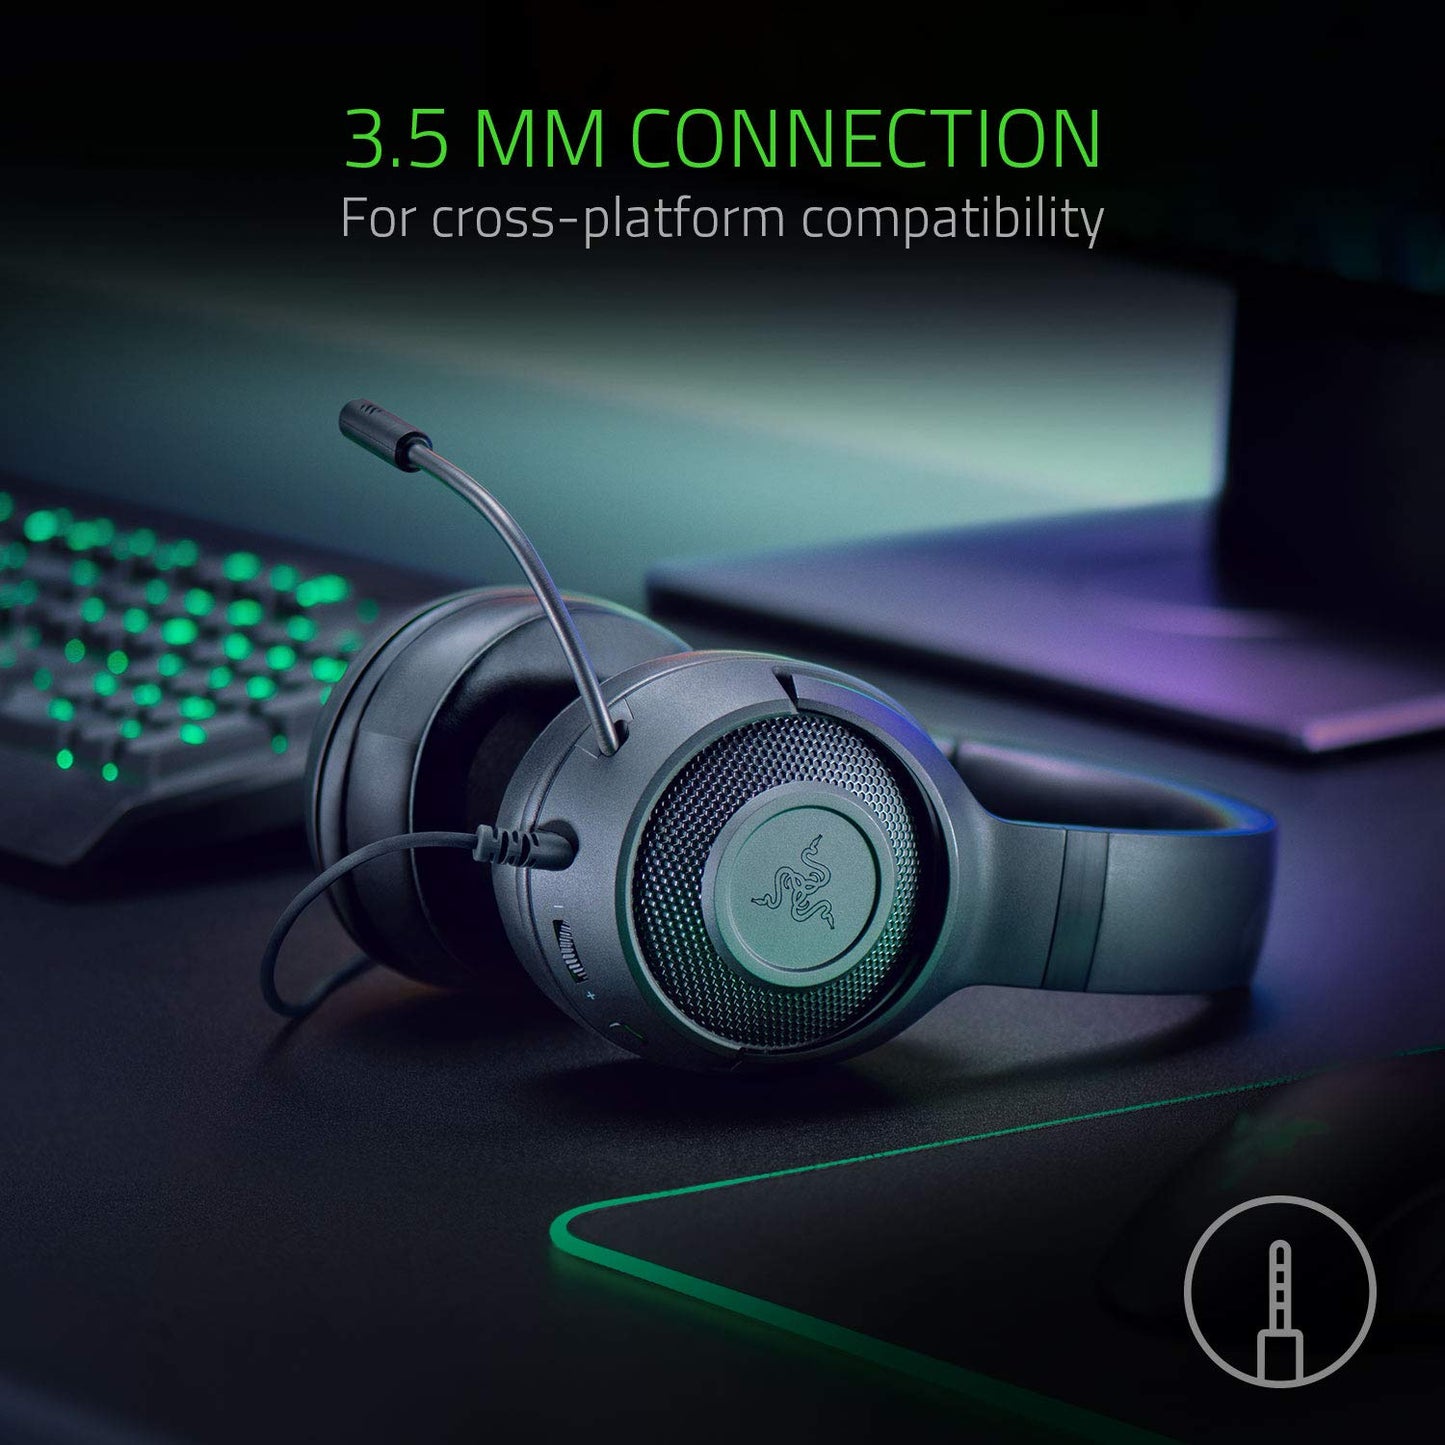 Razer Kraken X Ultralight Gaming Headset: 7.1 Surround Sound - Lightweight Aluminum Frame - Bendable Cardioid Microphone - PC, PS4, PS5, Switch, Xbox One, Xbox Series X & S, Mobile - Black